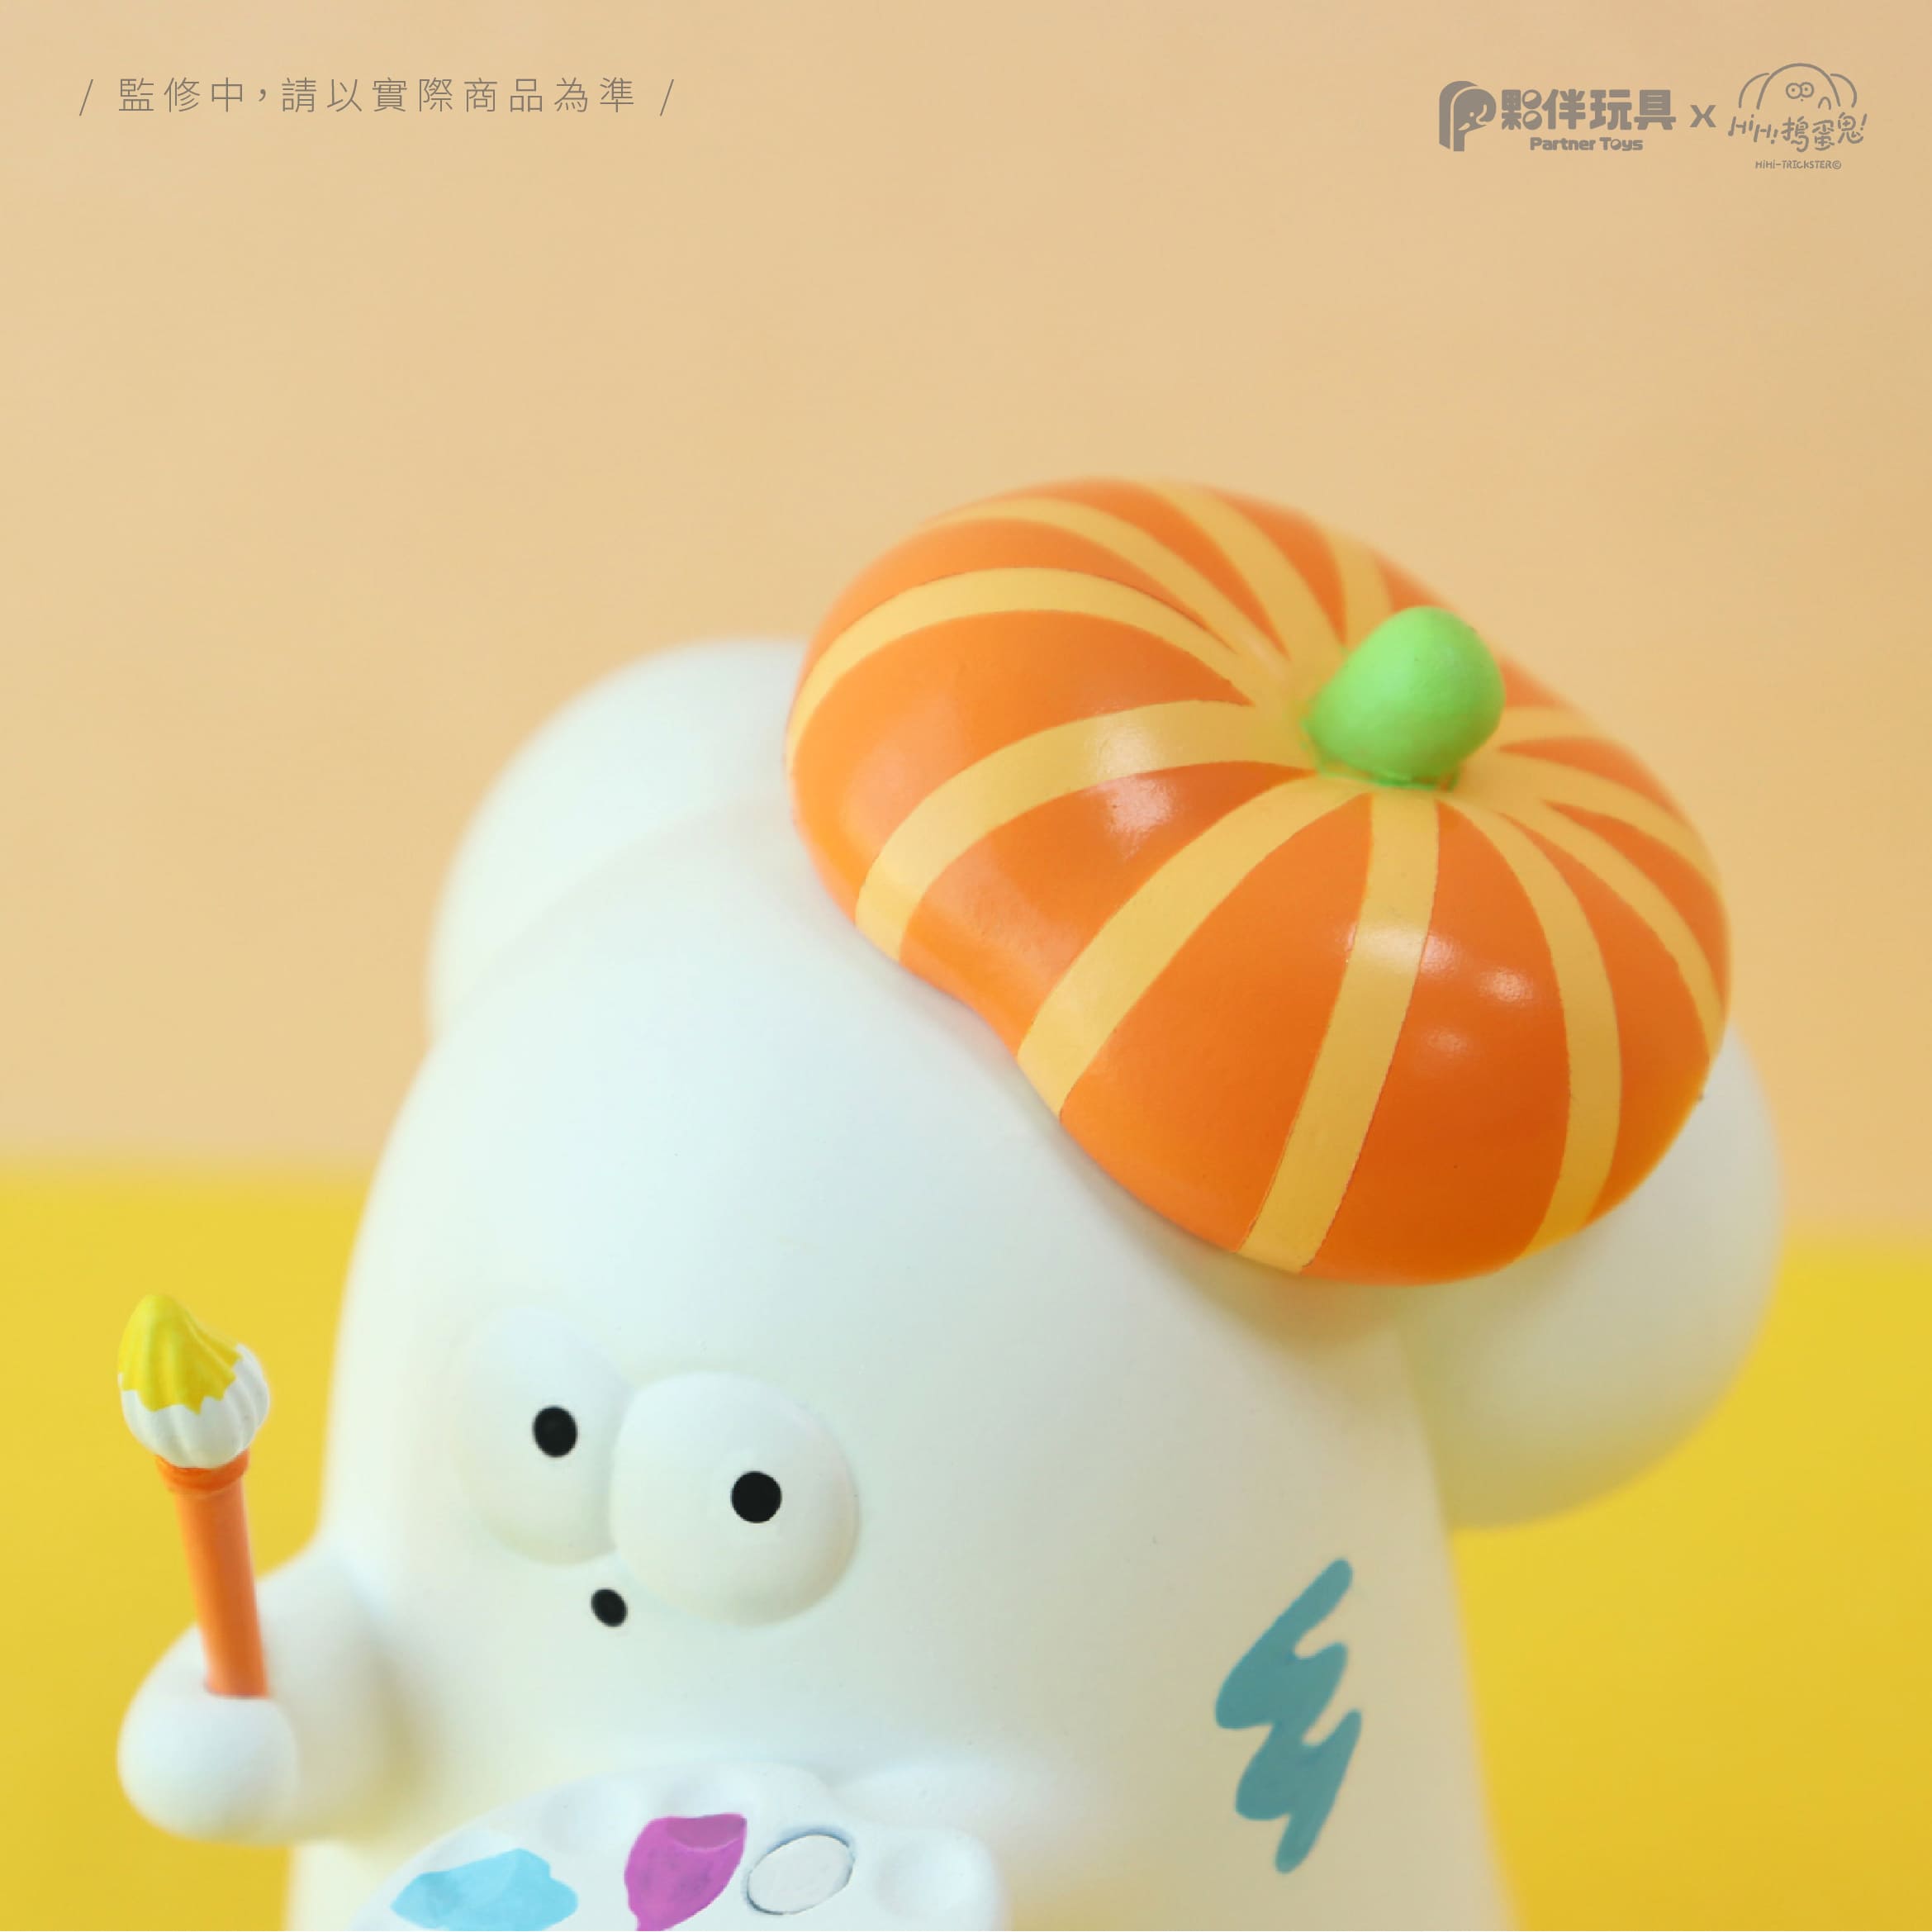 A small toy with a pumpkin hat and paint brush, part of the HIHI TRICKSTER DAILY Blind Box Series.